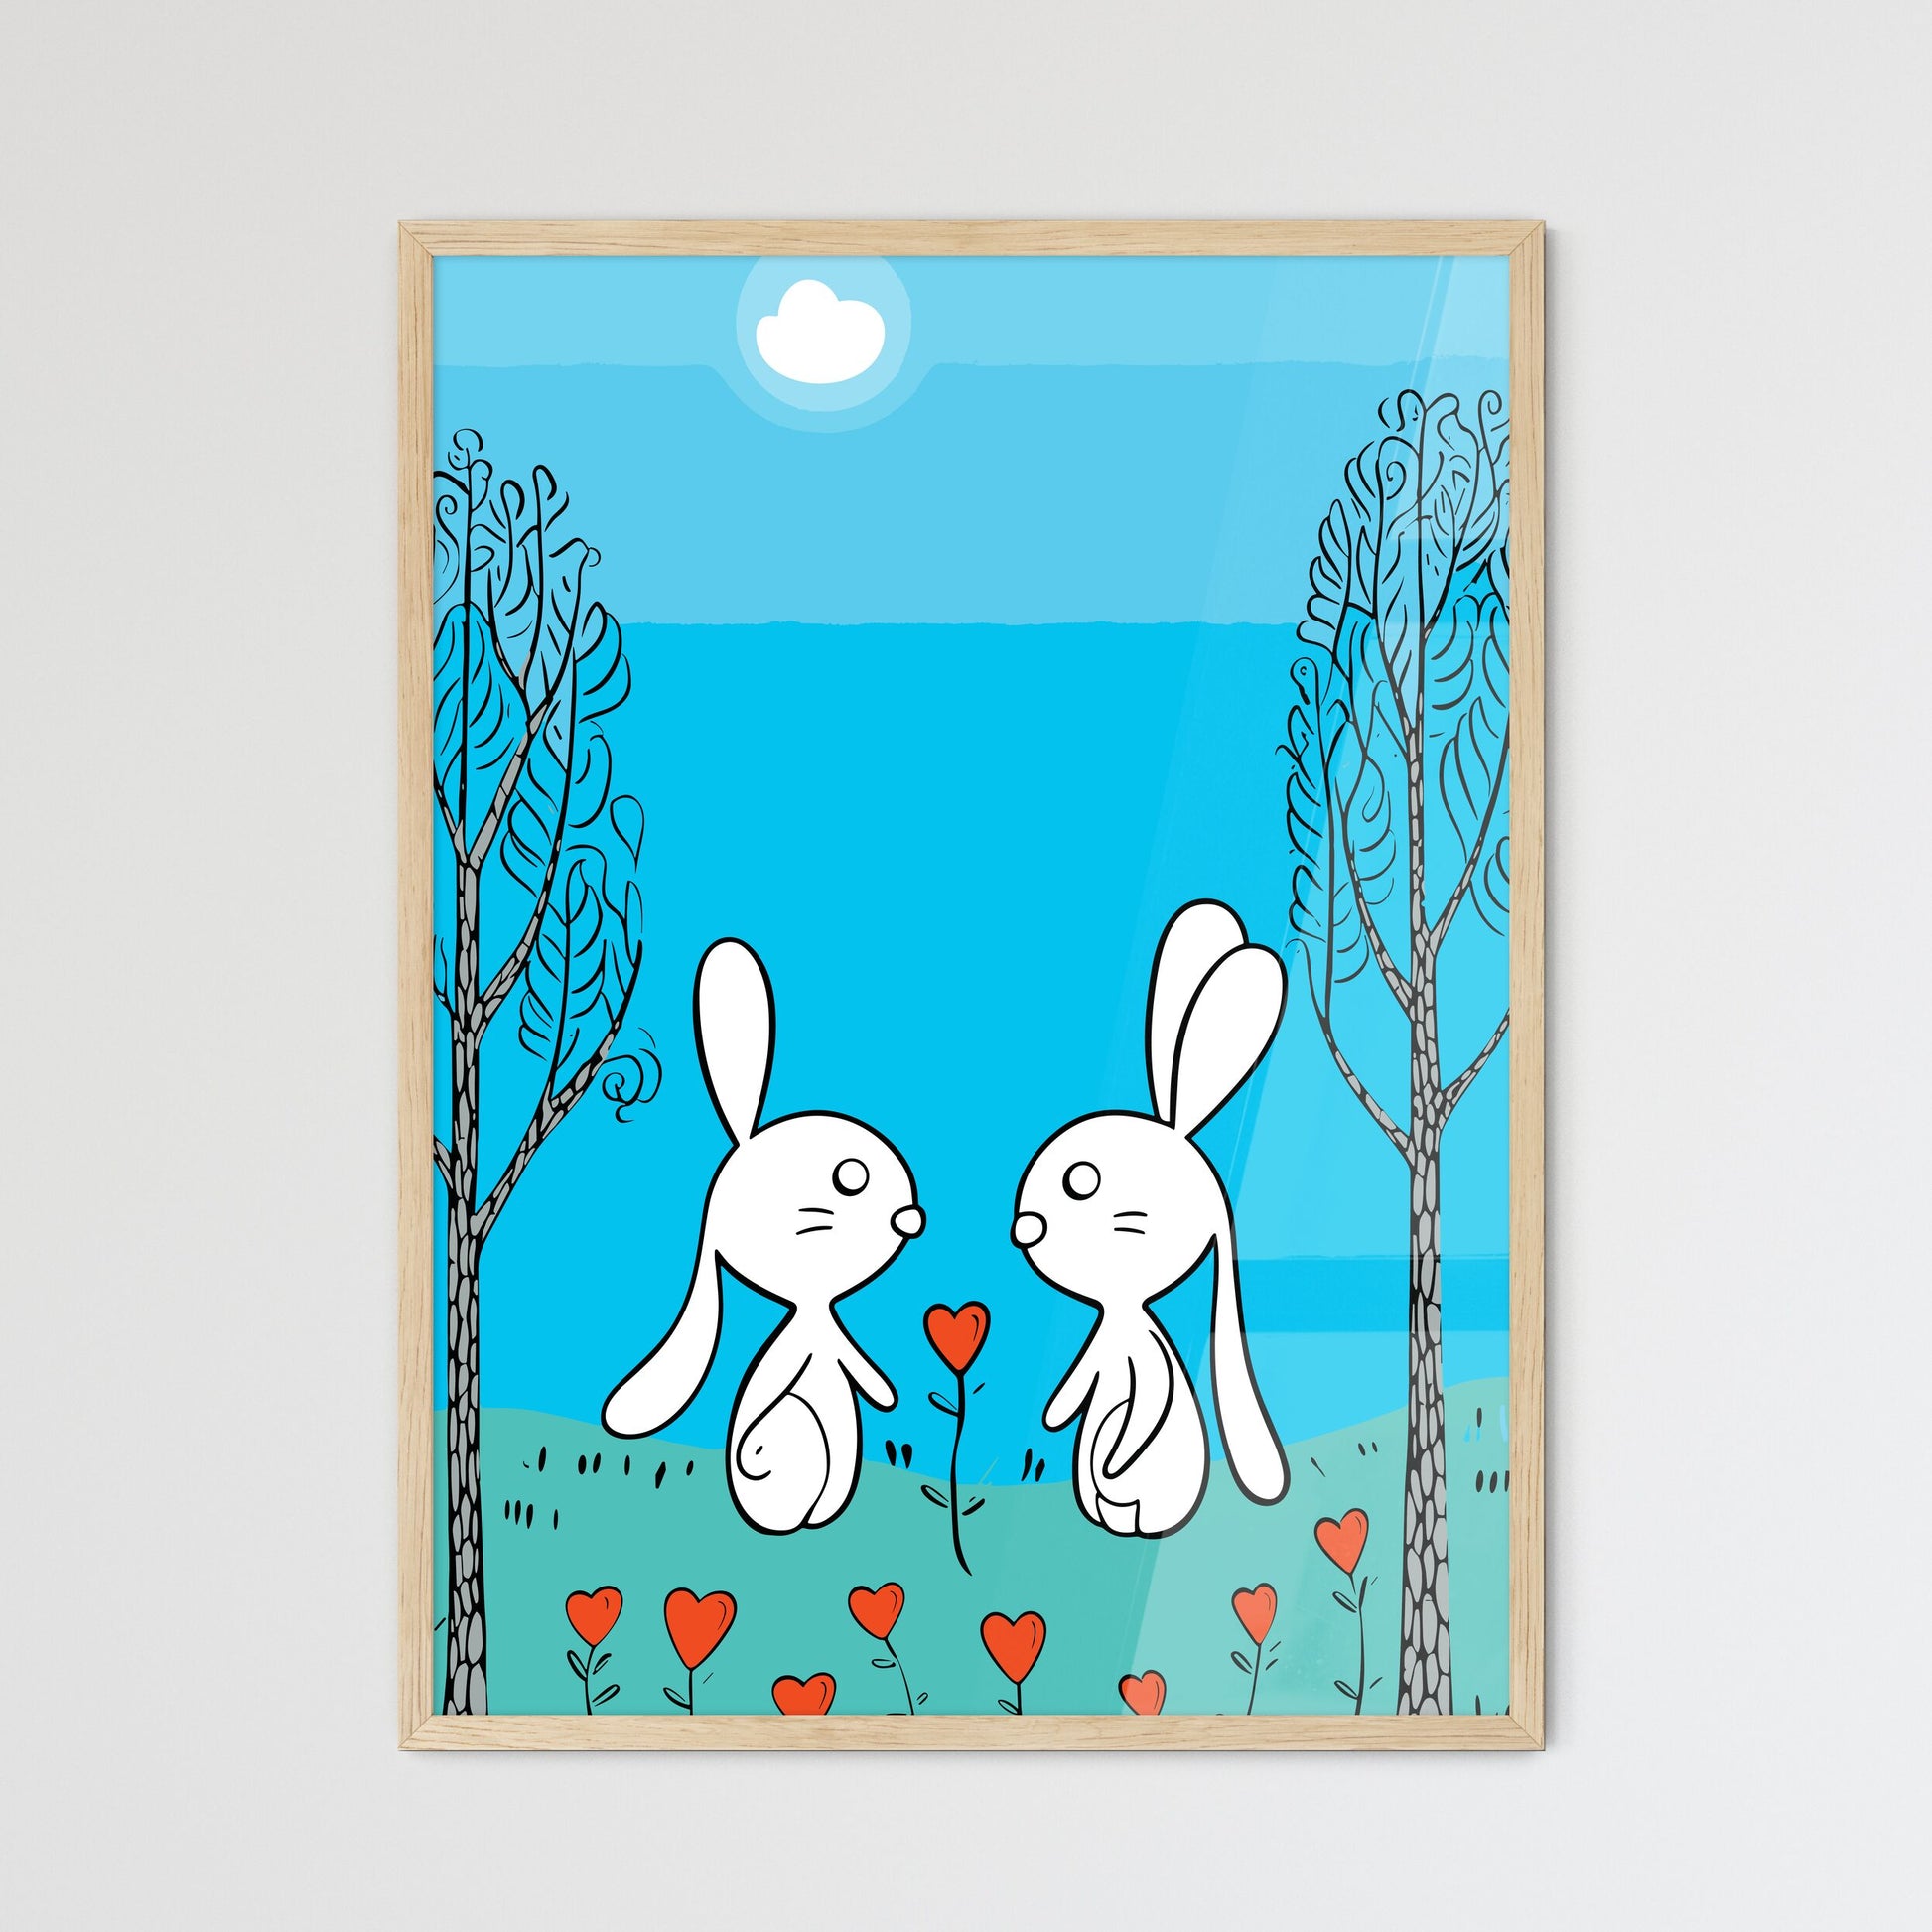 Cute Cute Bunnies In Love - A Cartoon Of Two Bunnies In A Field With Trees And A Heart Default Title